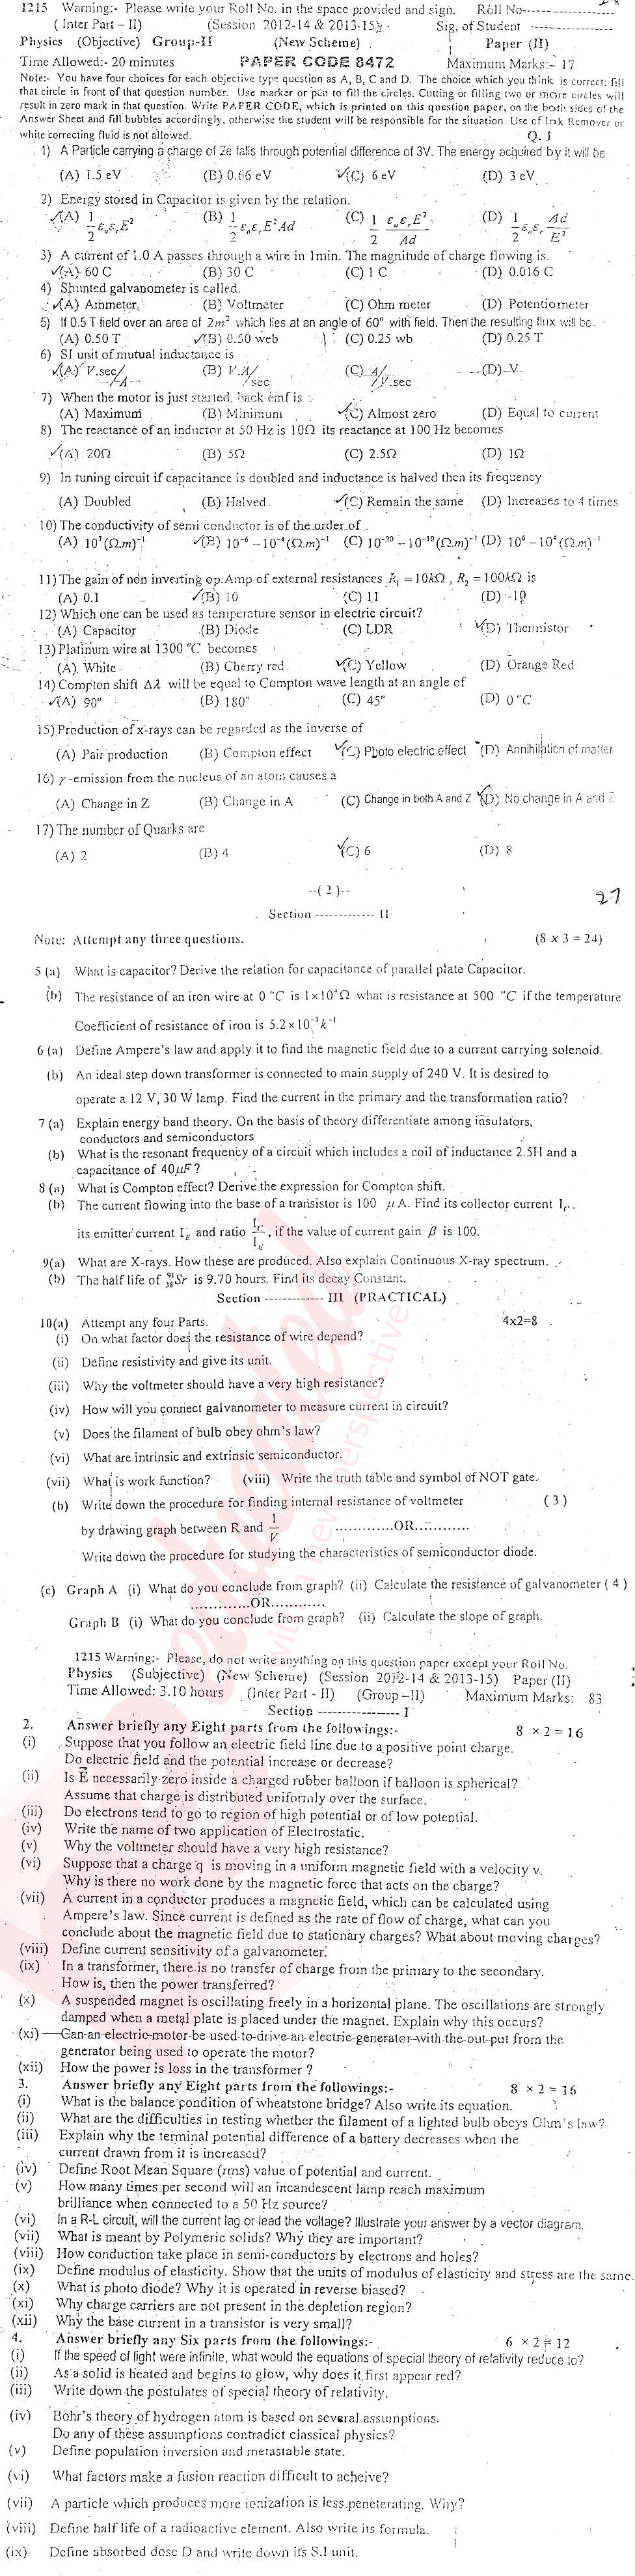 Physics 12th class Past Paper Group 2 BISE Sargodha 2015